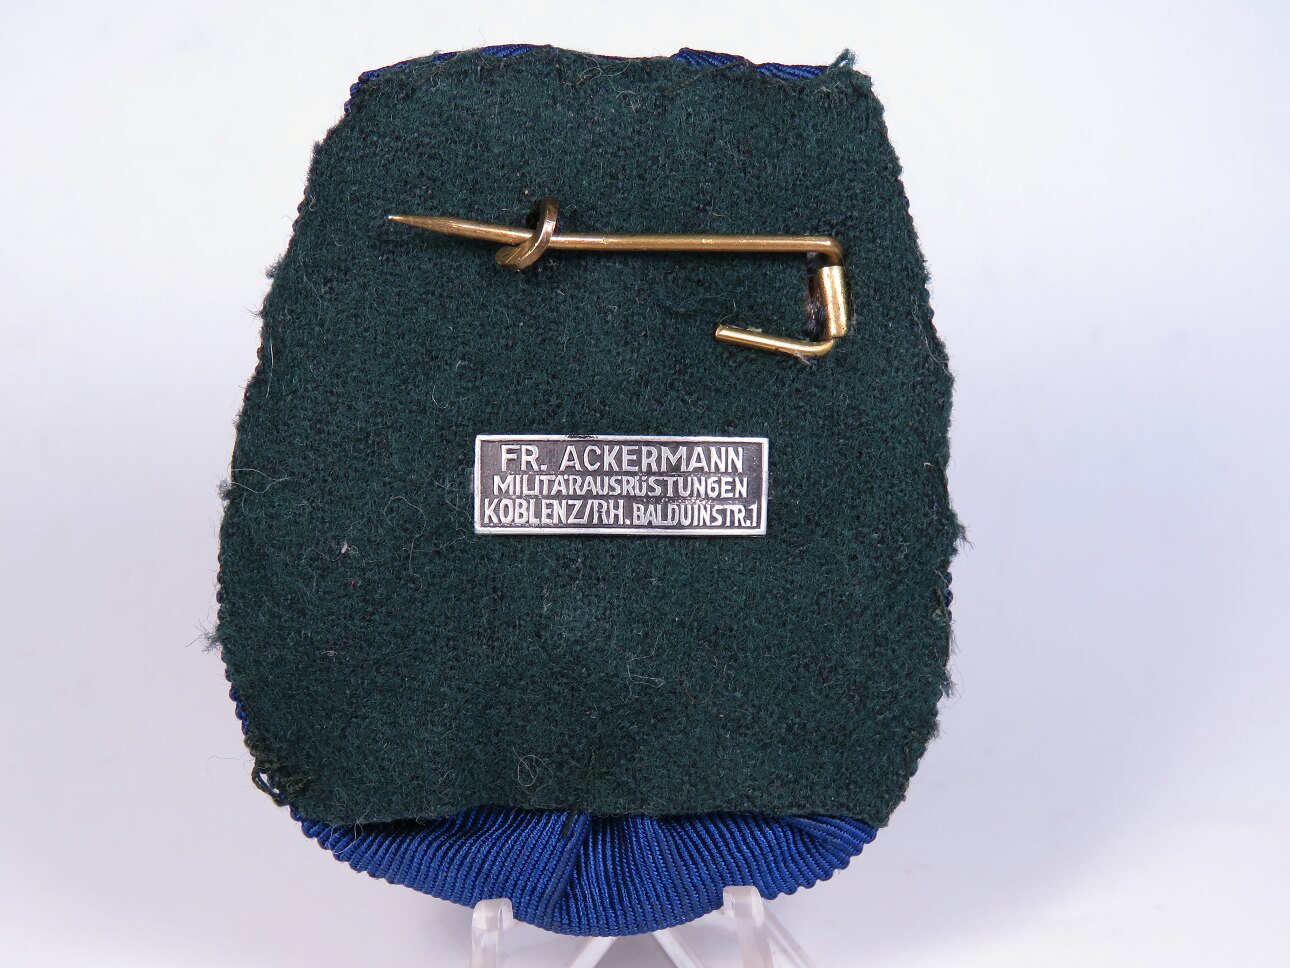 Medal for 4 years of the service in the Wehrmacht on the Ackermann bar